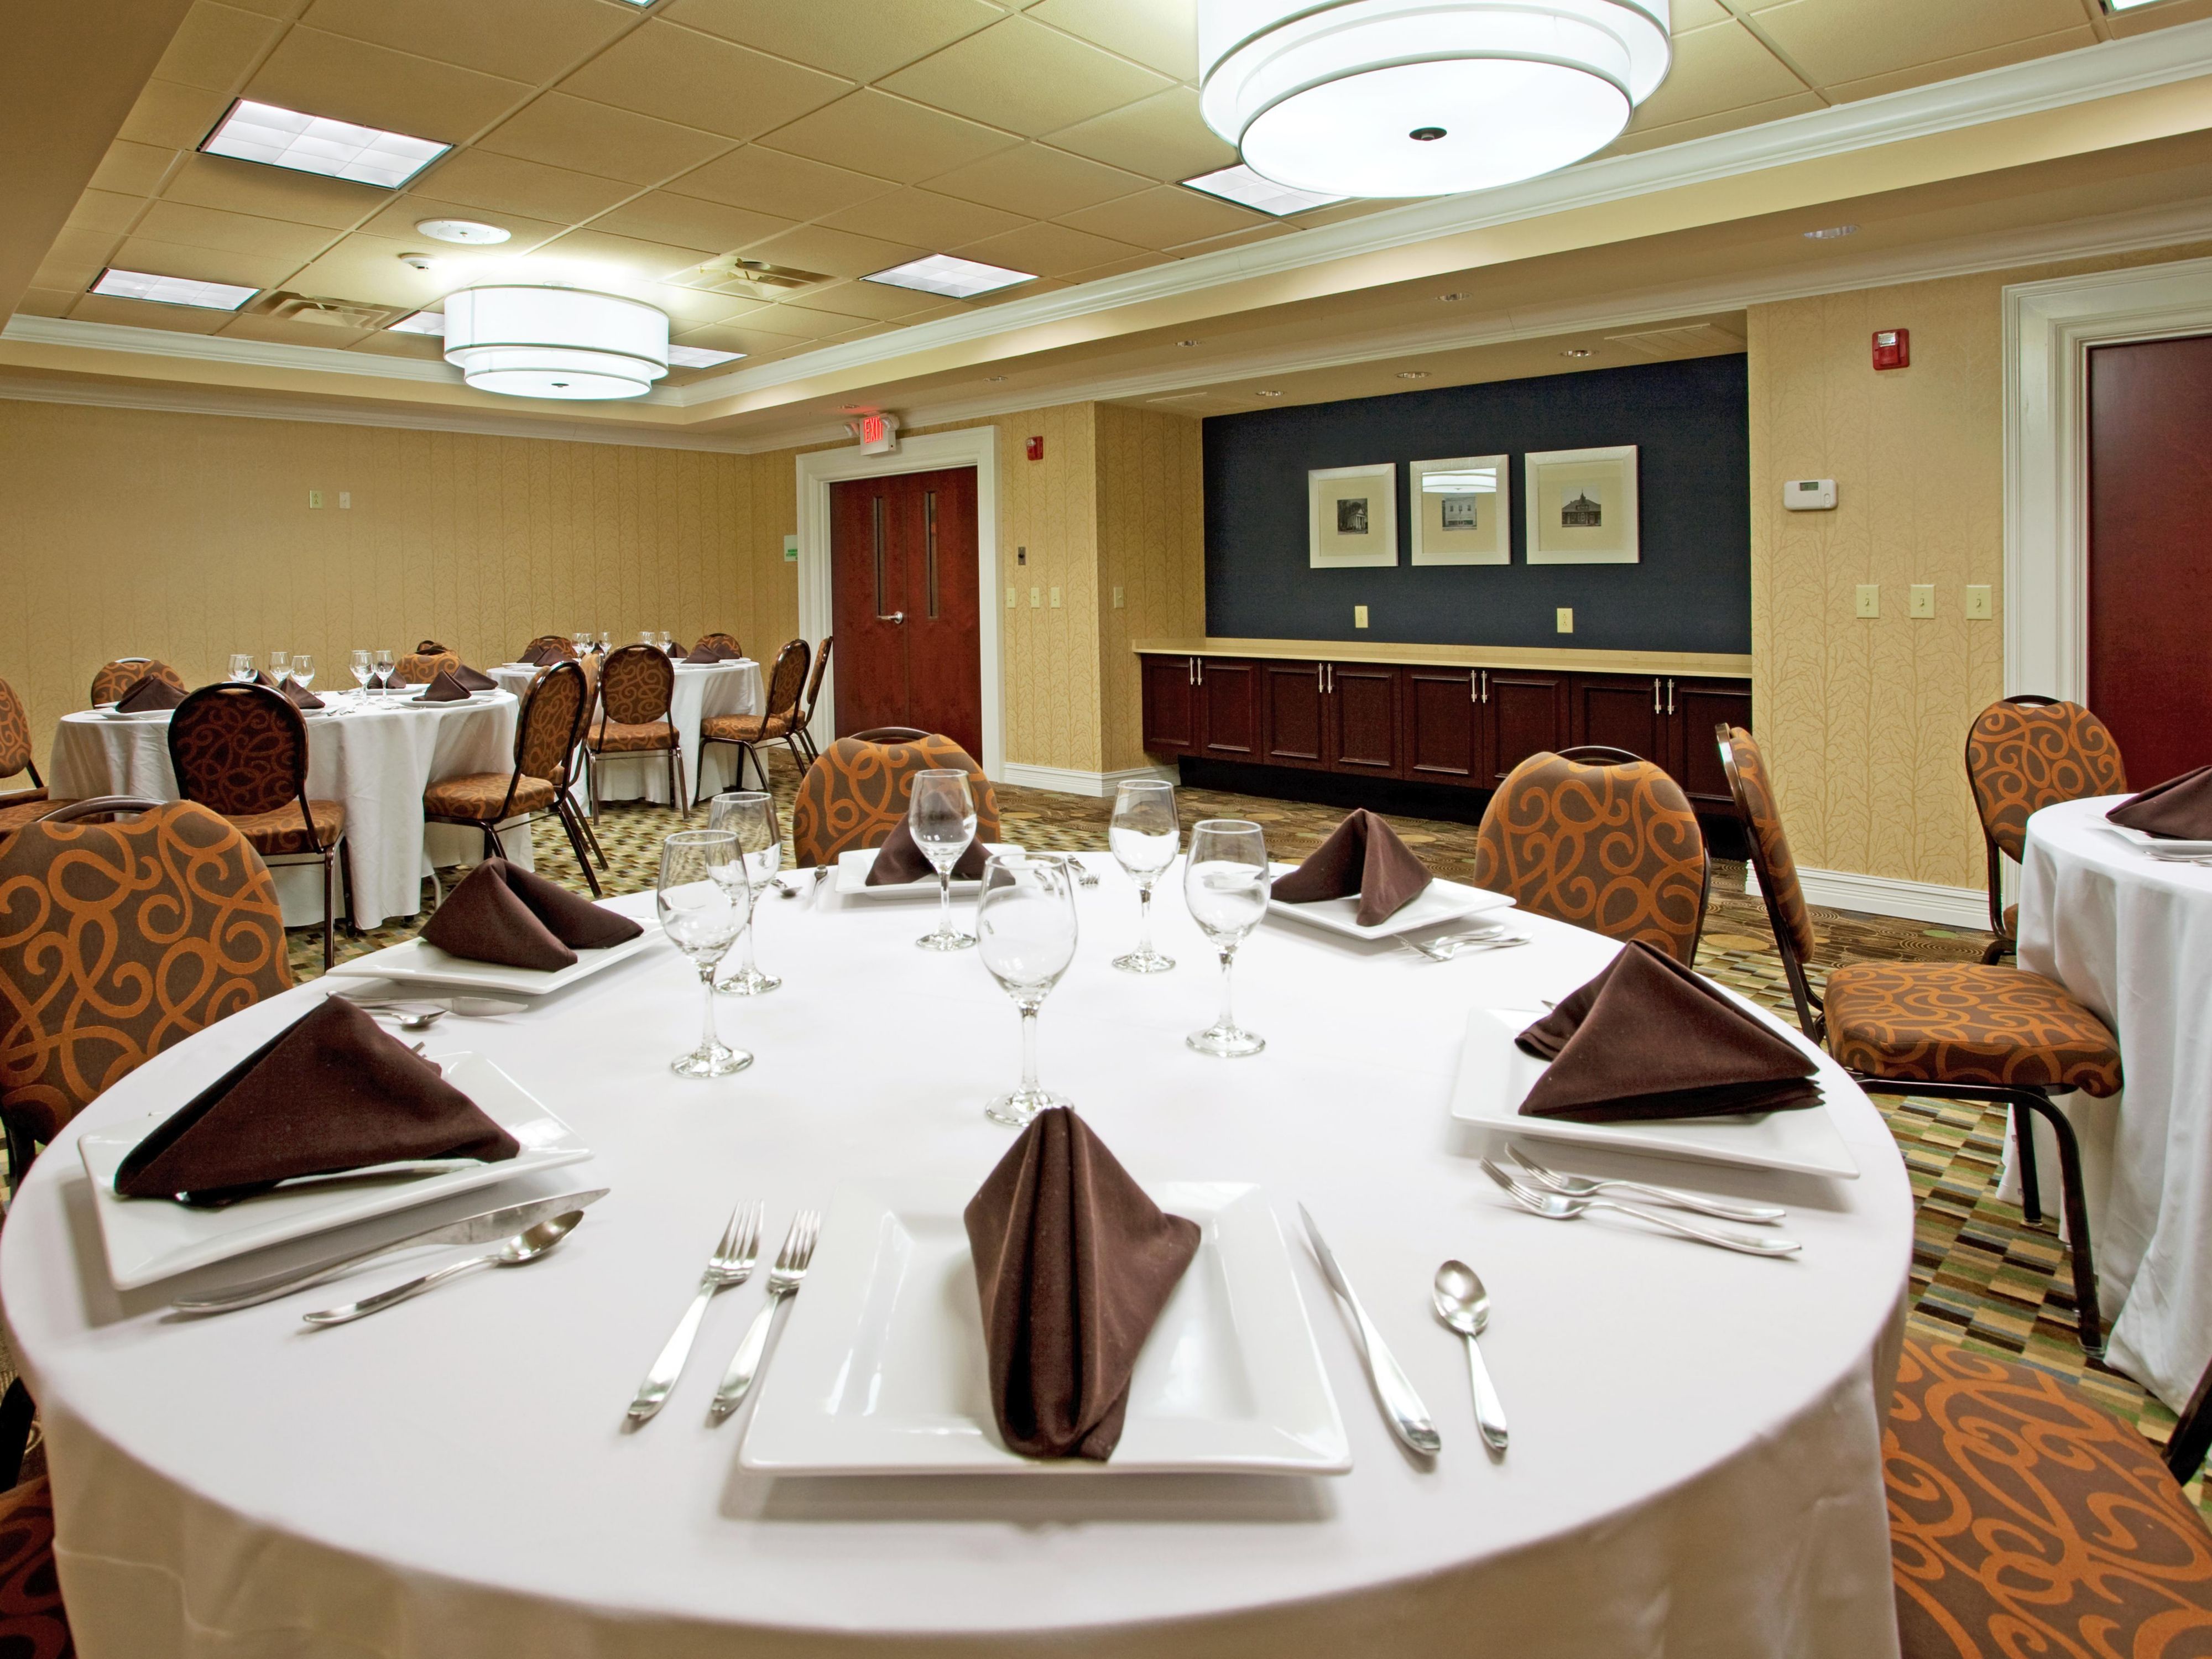 With over 800 sq. ft. of meeting space we can accommodate events from 15 guests to 50 guests. Our seasoned staff will assist you from your initial inquiry until the conclusion of your event. We take your vision and make it a reality.